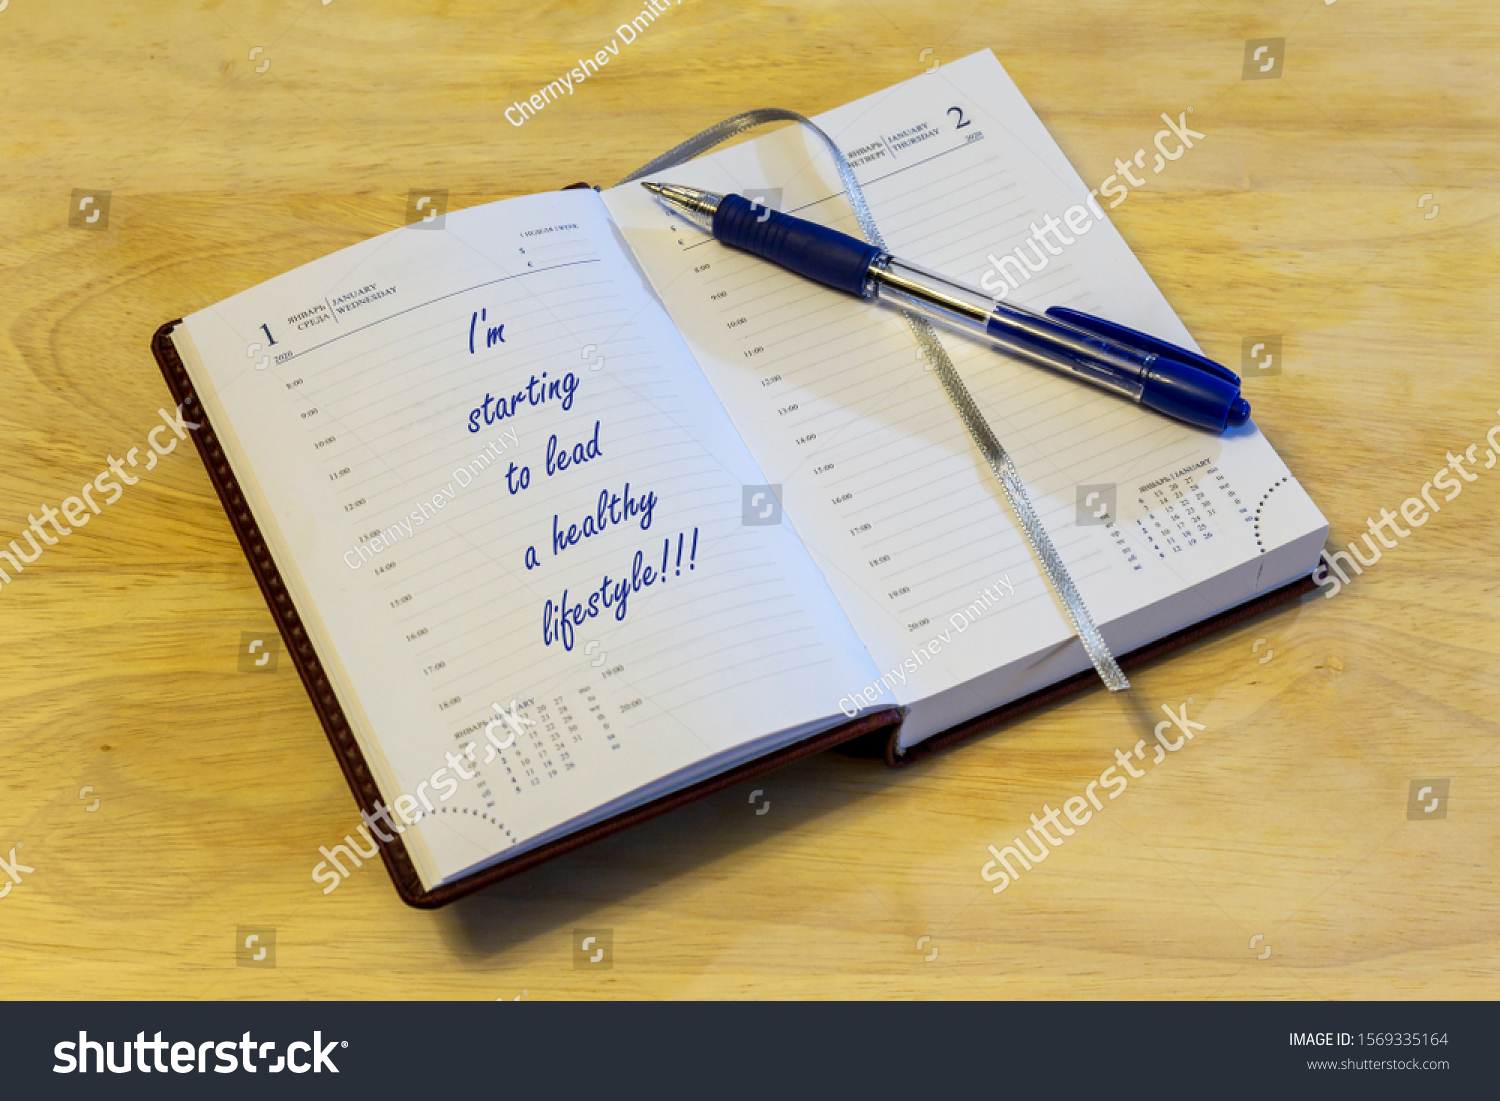 The diary is on the table. The diary is open on the first of January page. The page reads: "I'm starting to lead a healthy lifestyle!!!". #1569335164